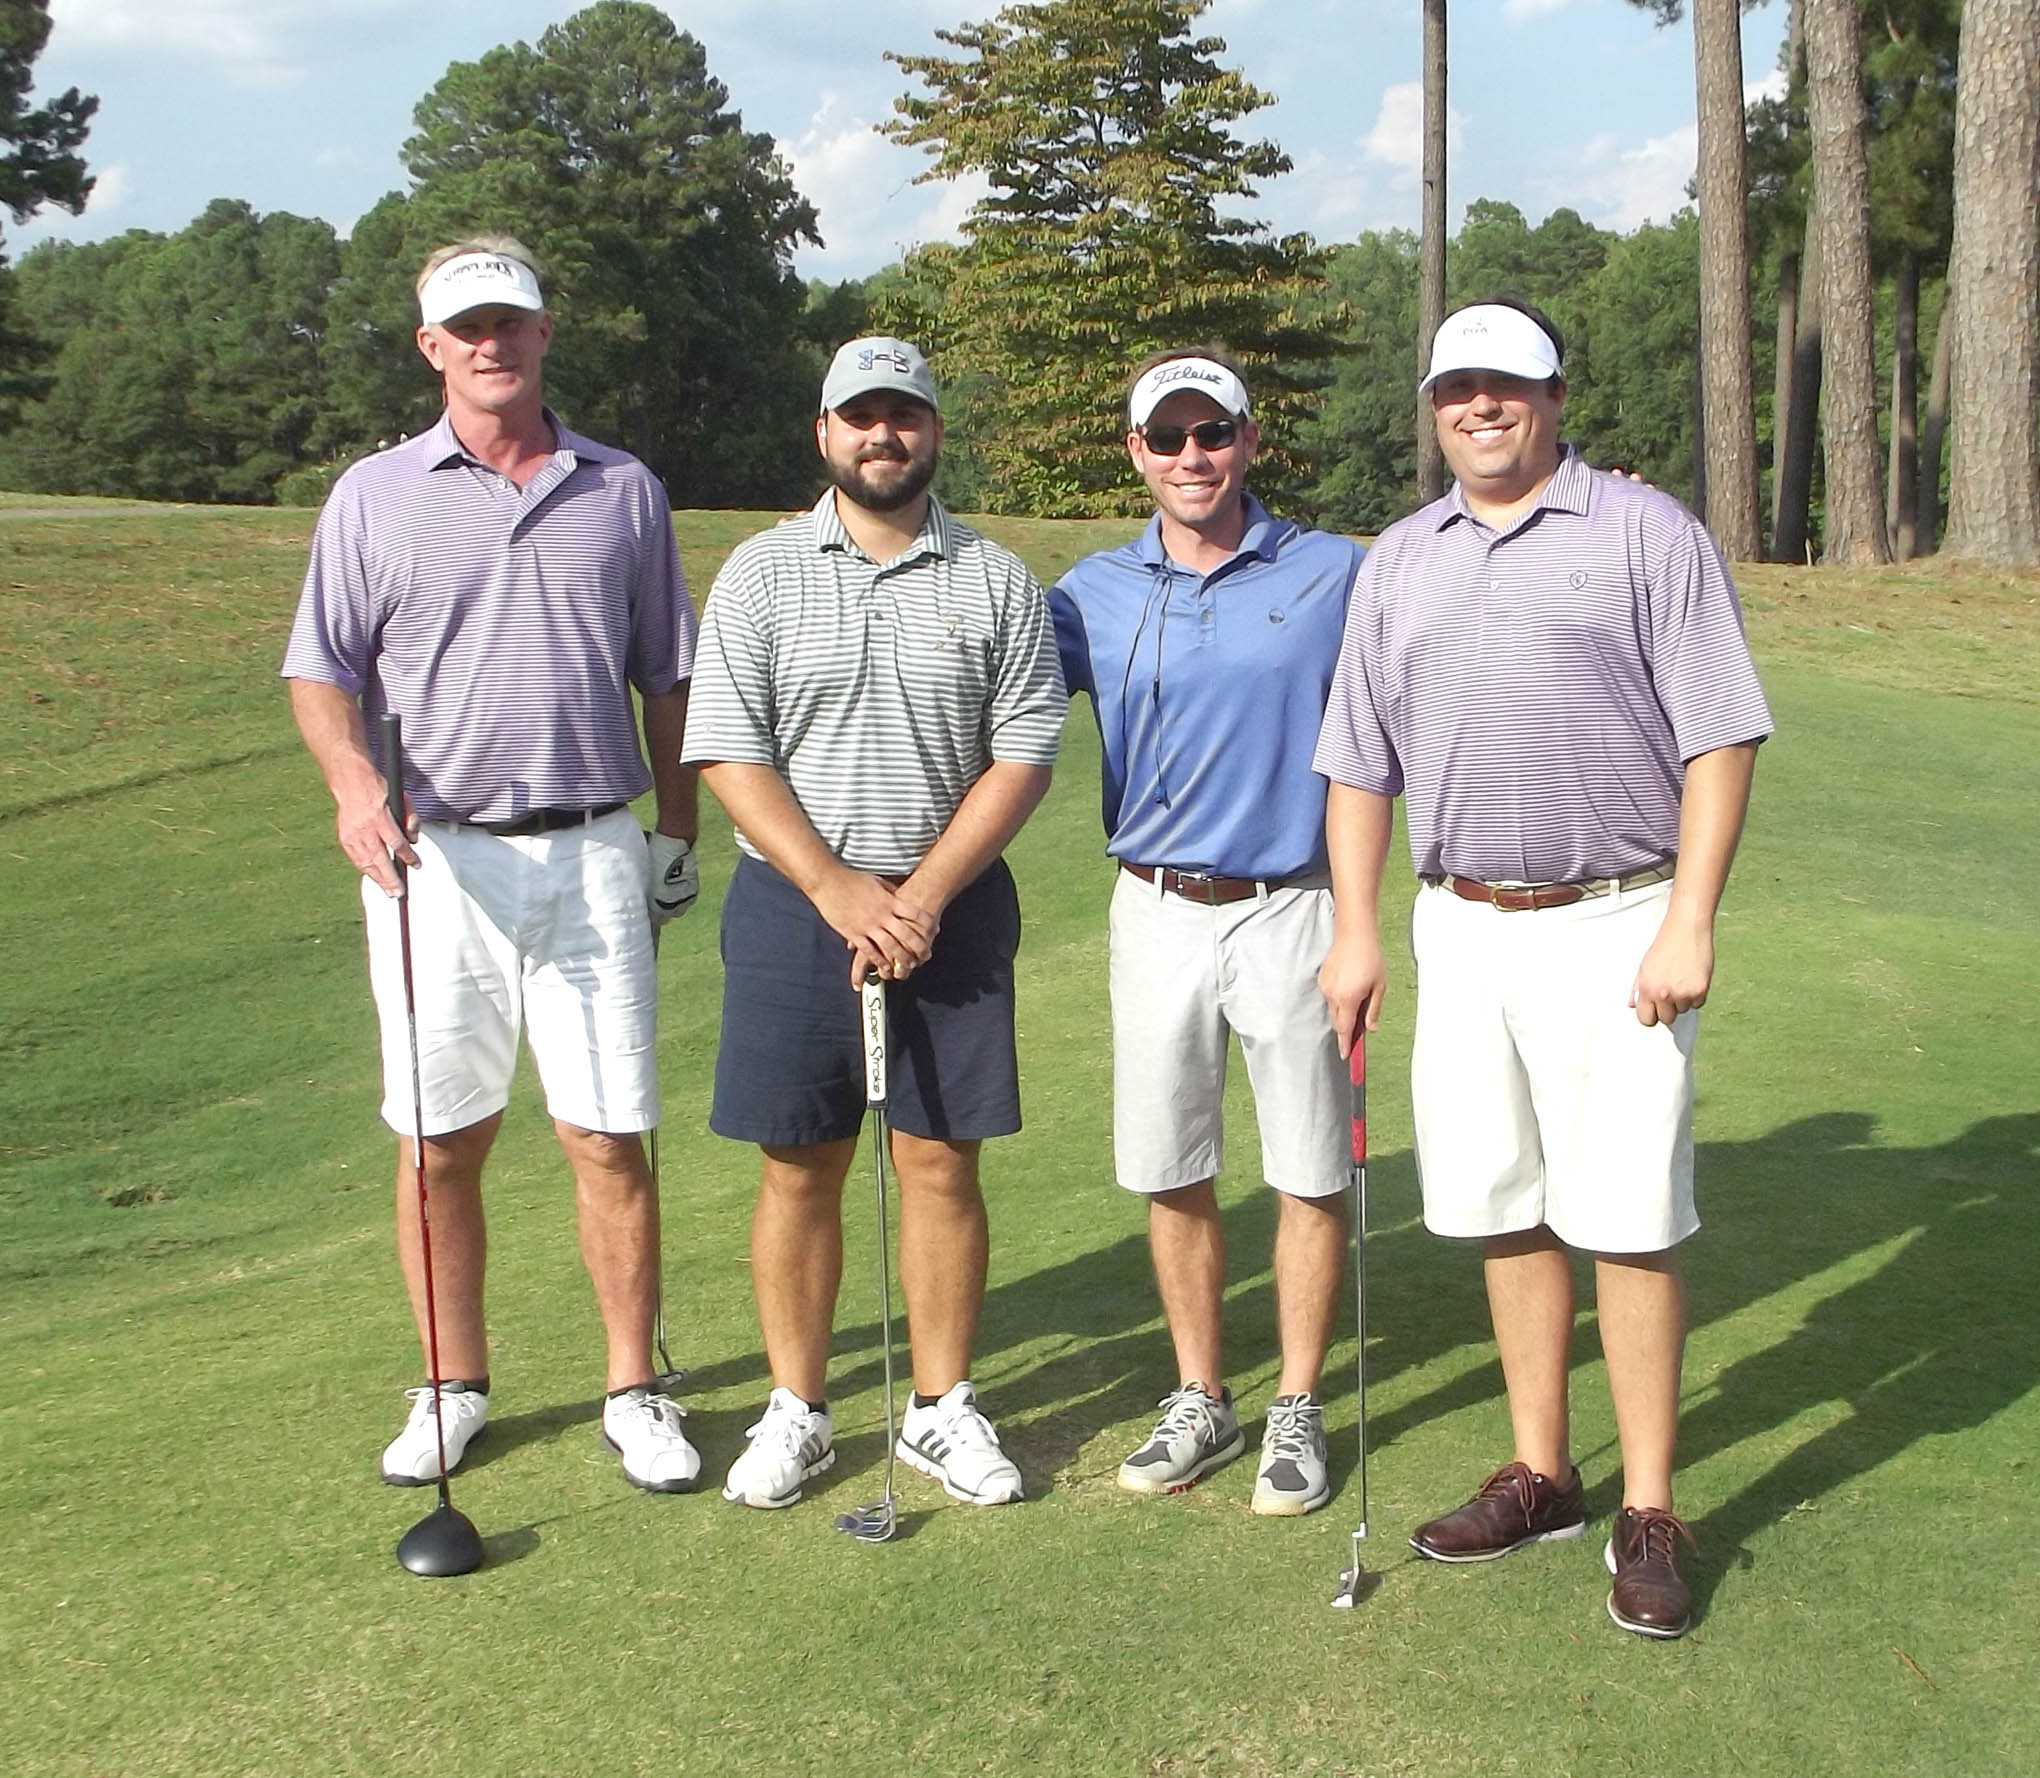 Click to enlarge,  The team of Chas Post, Cameron Sharpe, Trey Williams, and Christian Davenport tied for first in the second flight of the afternoon tournament of the CCCC Foundation Lee Golf Classic. 